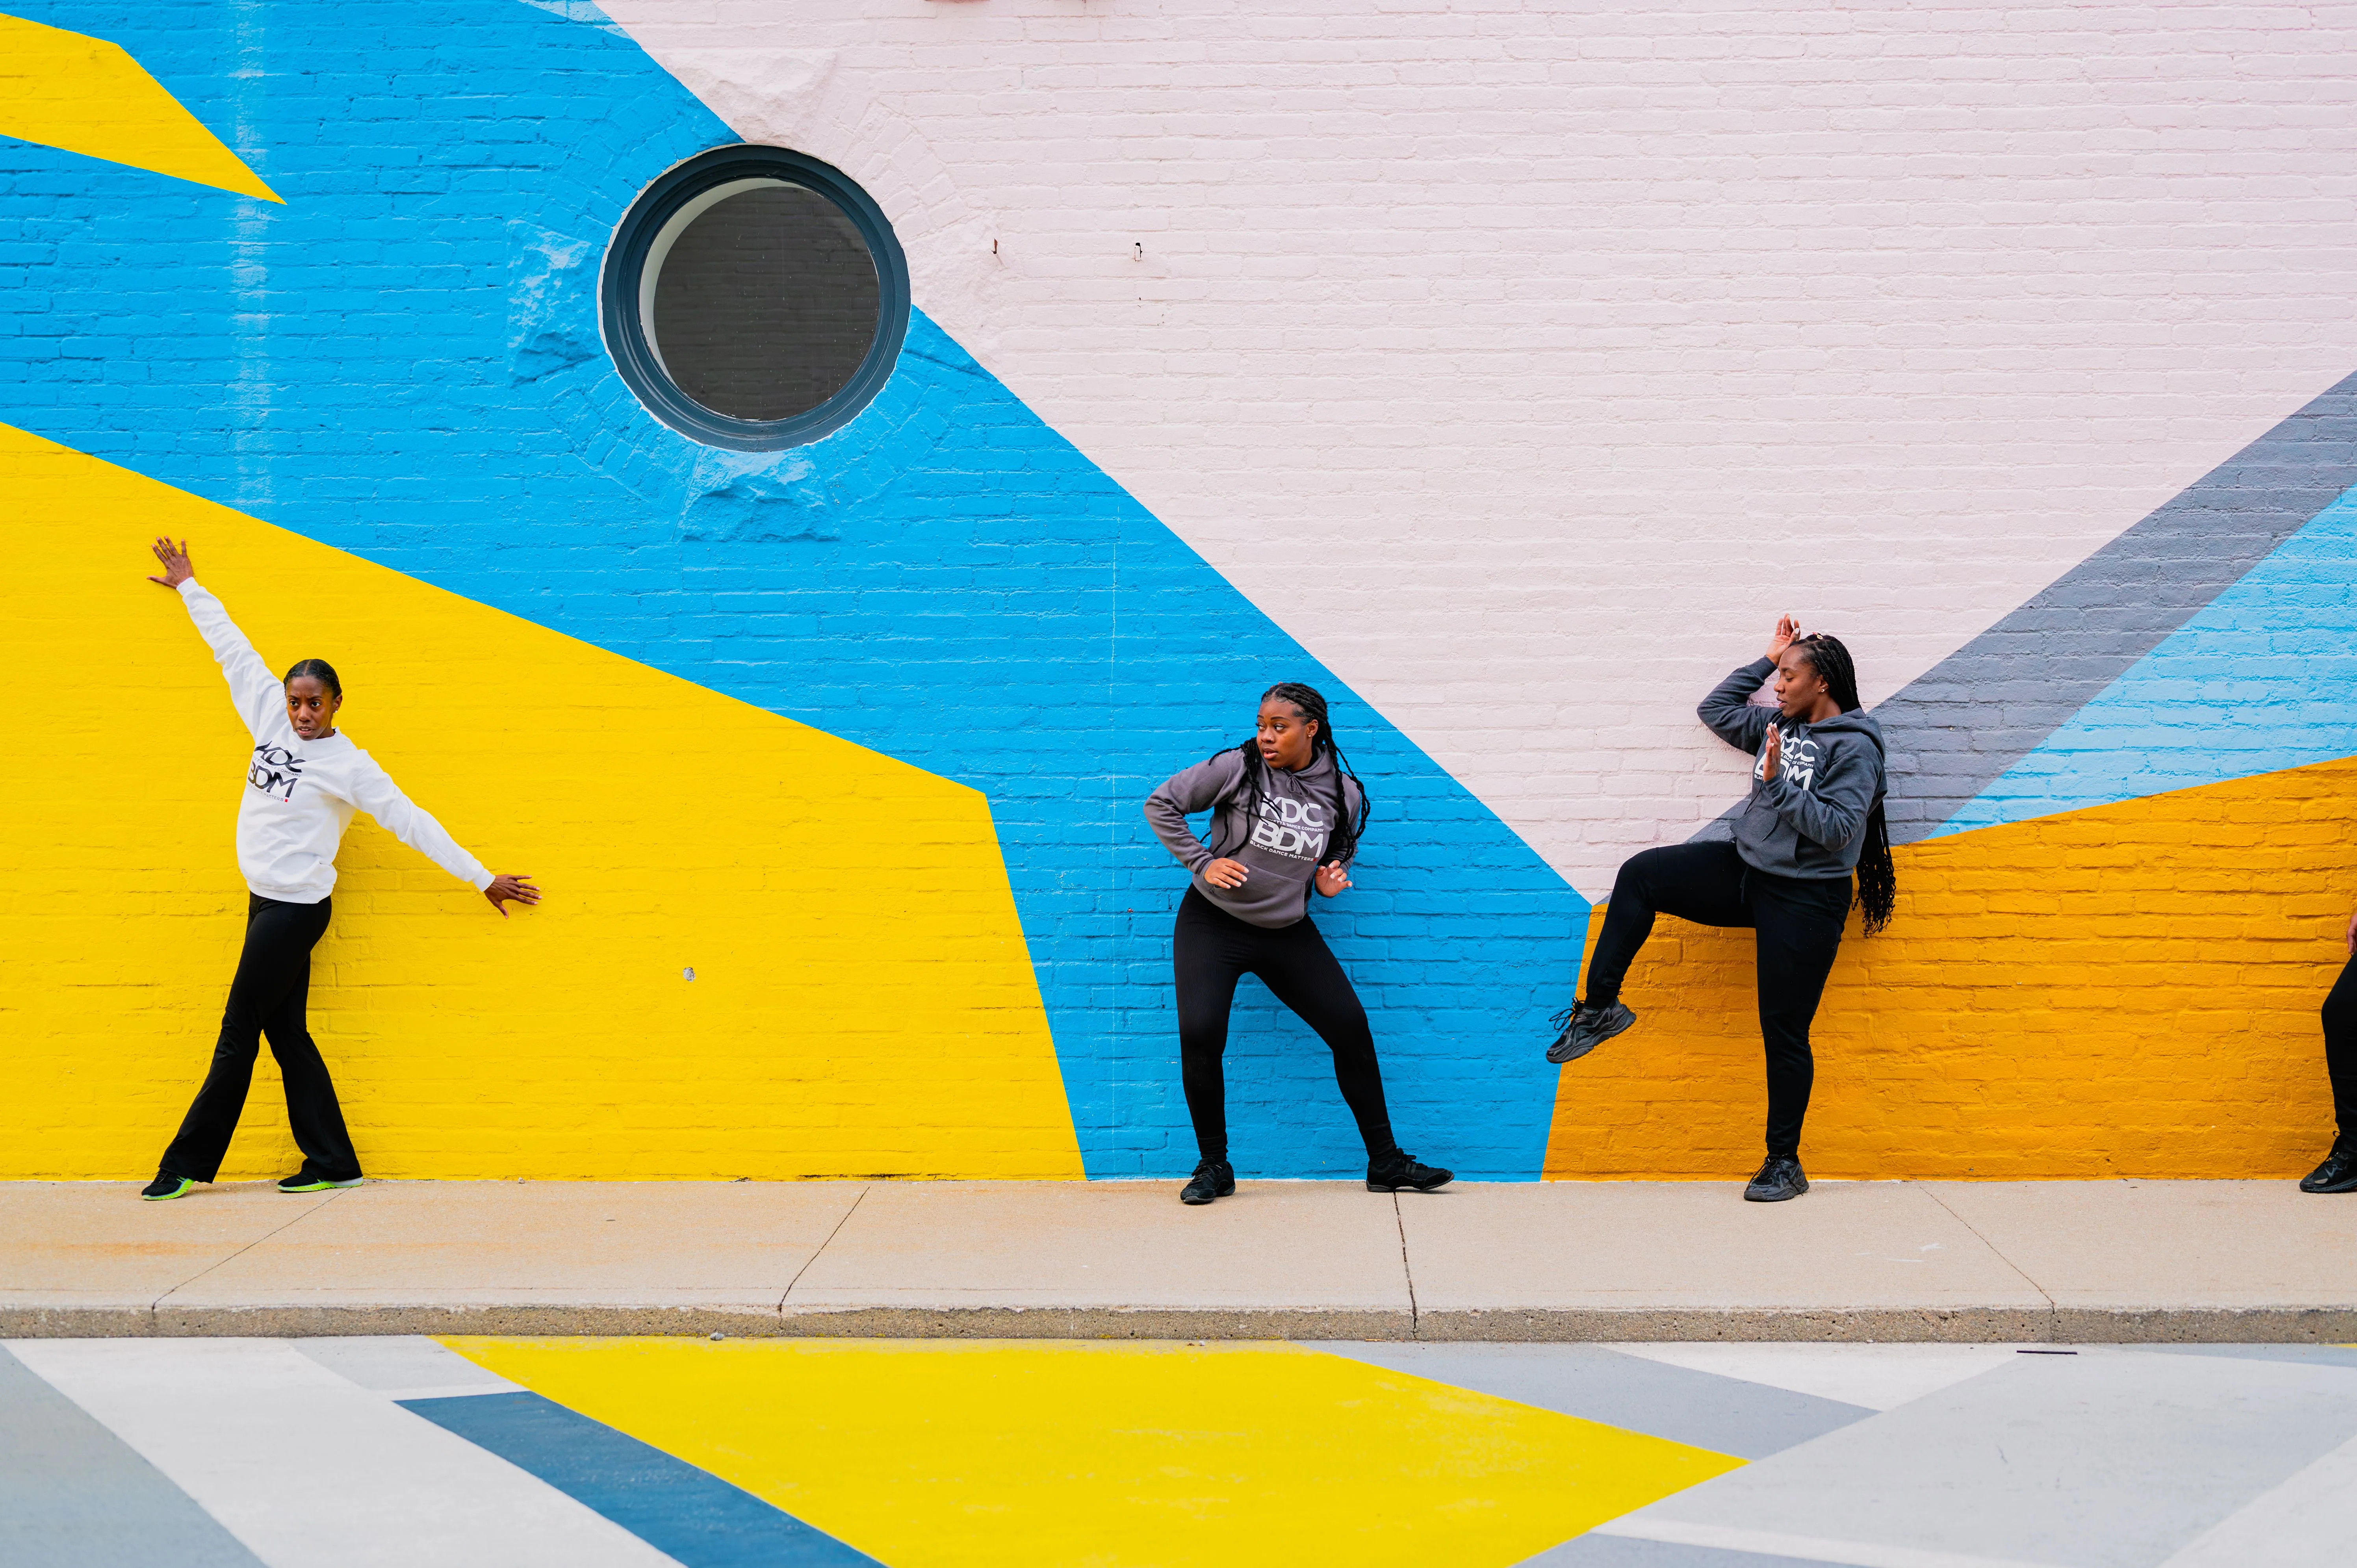 Three people posing playfully against a colorful geometric mural on a wall.